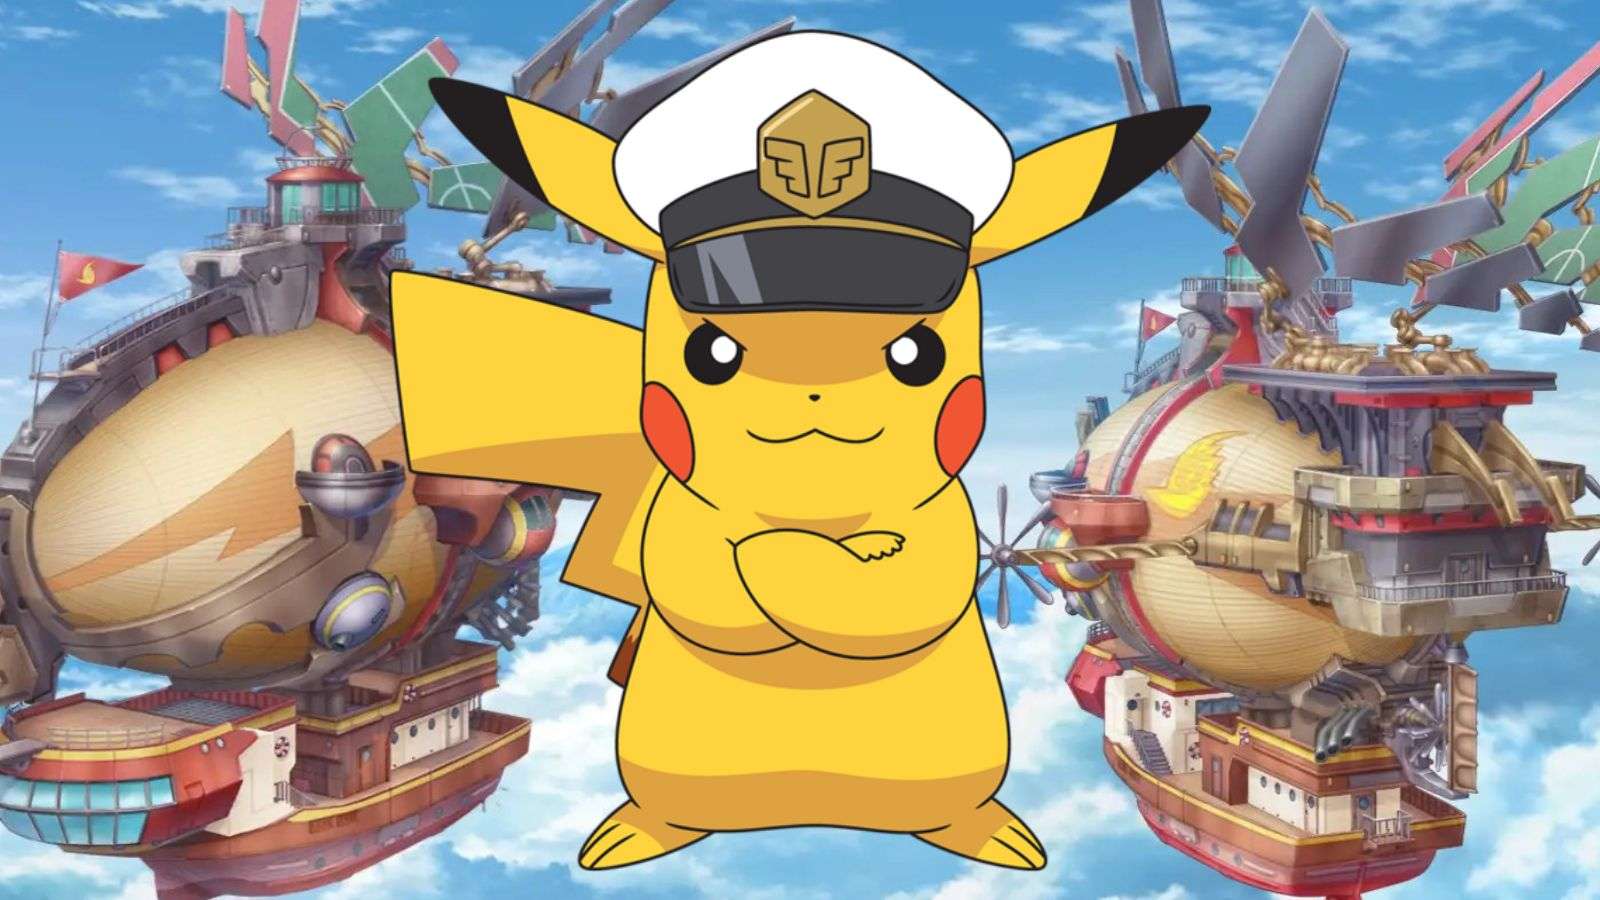 First look at Captain Pikachu's team members in Pokemon anime